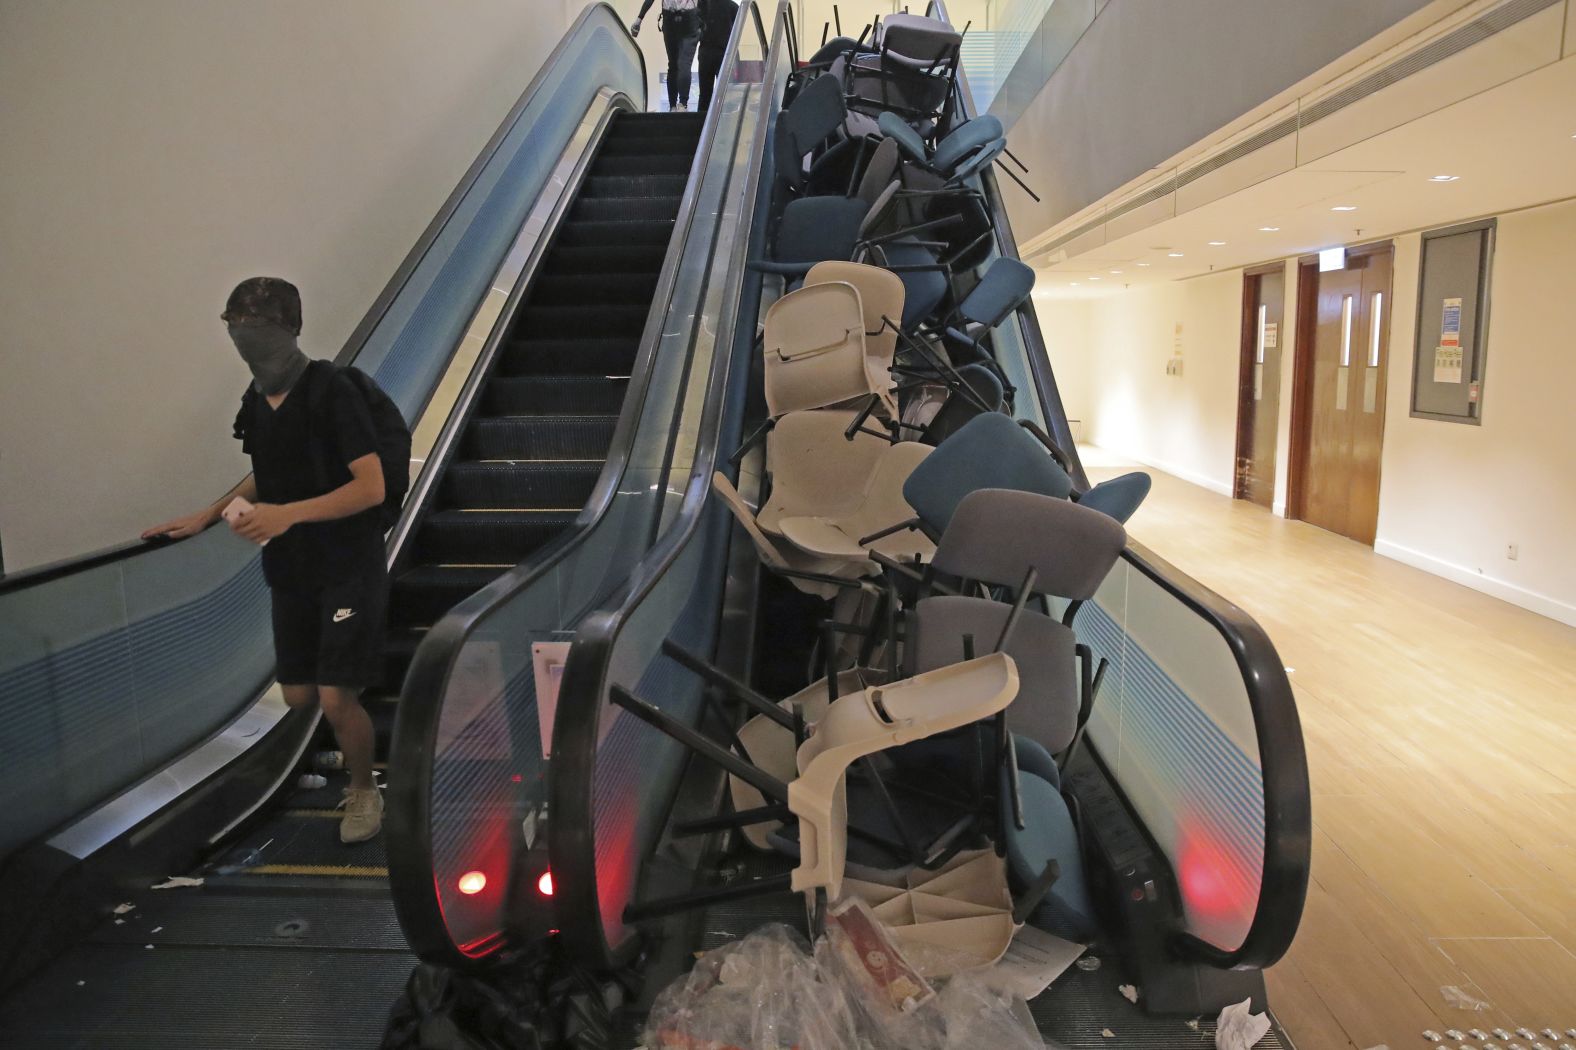 Students block an escalator with chairs in an attempt to hamper police at the University of Hong Kong on November 12.